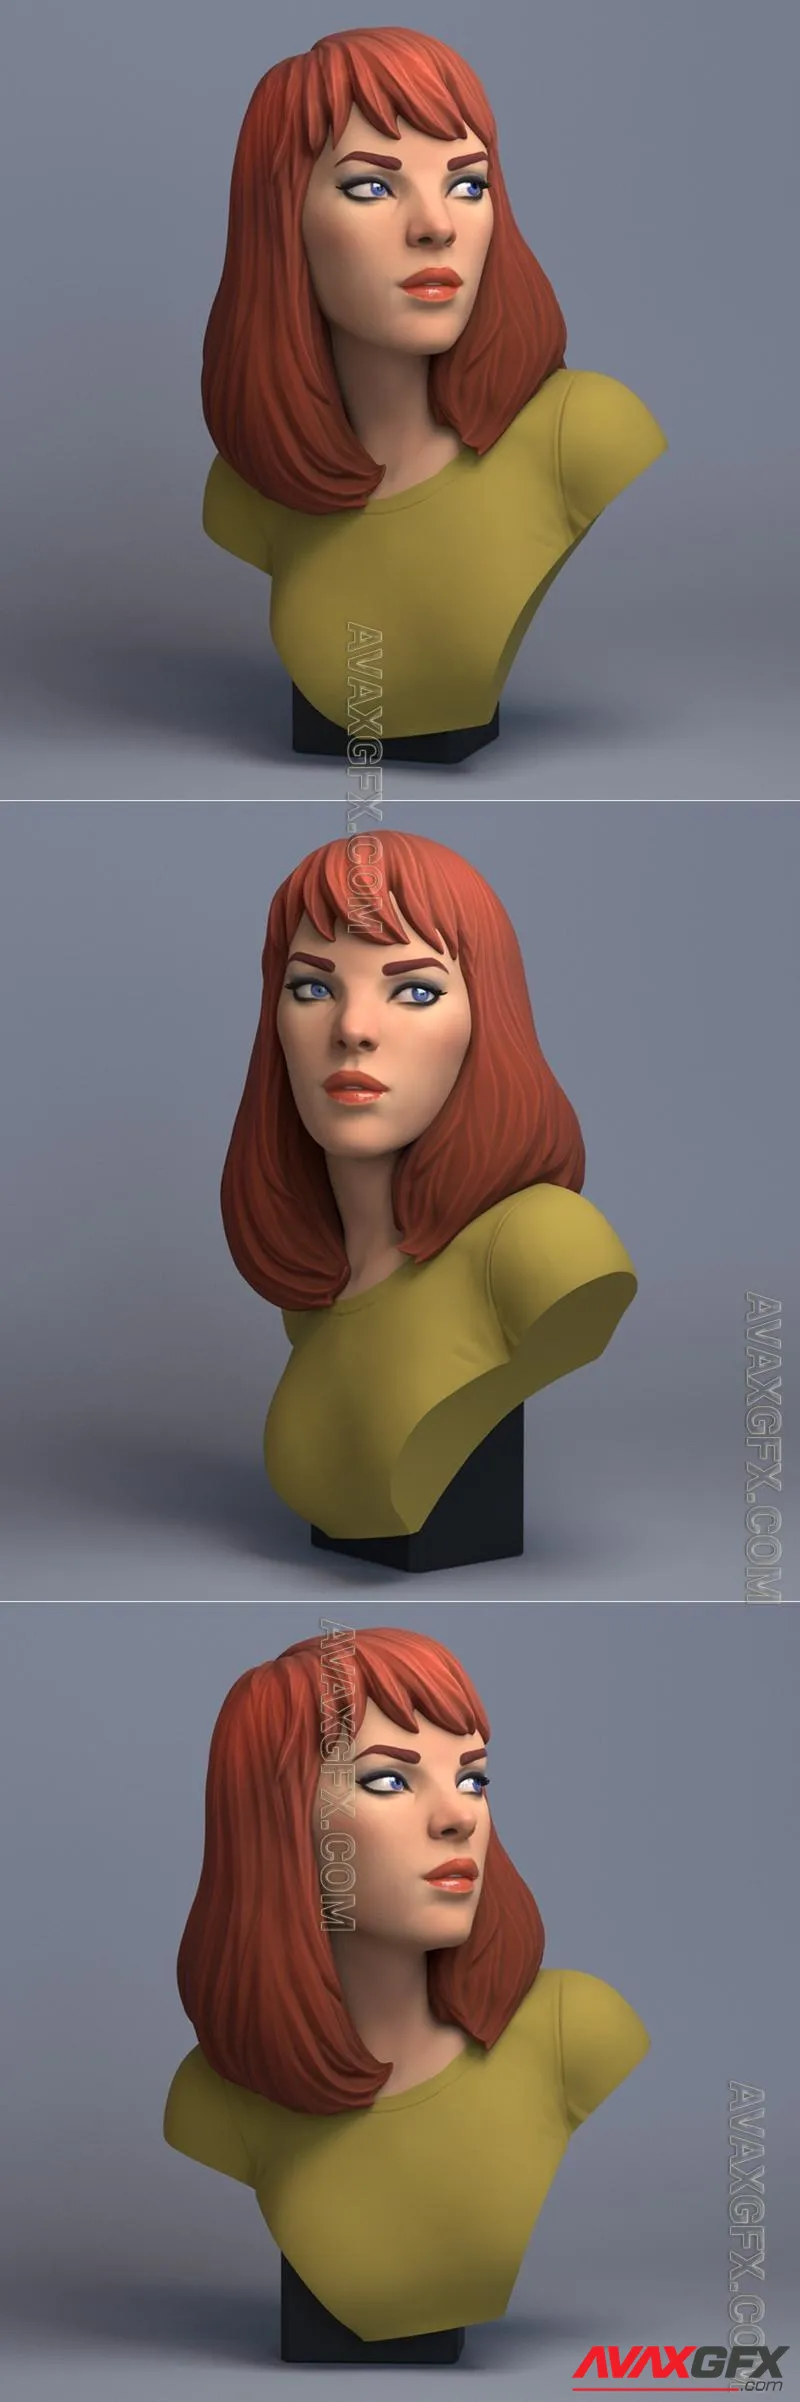 Mary Jane Statue Bust - STL 3D Model